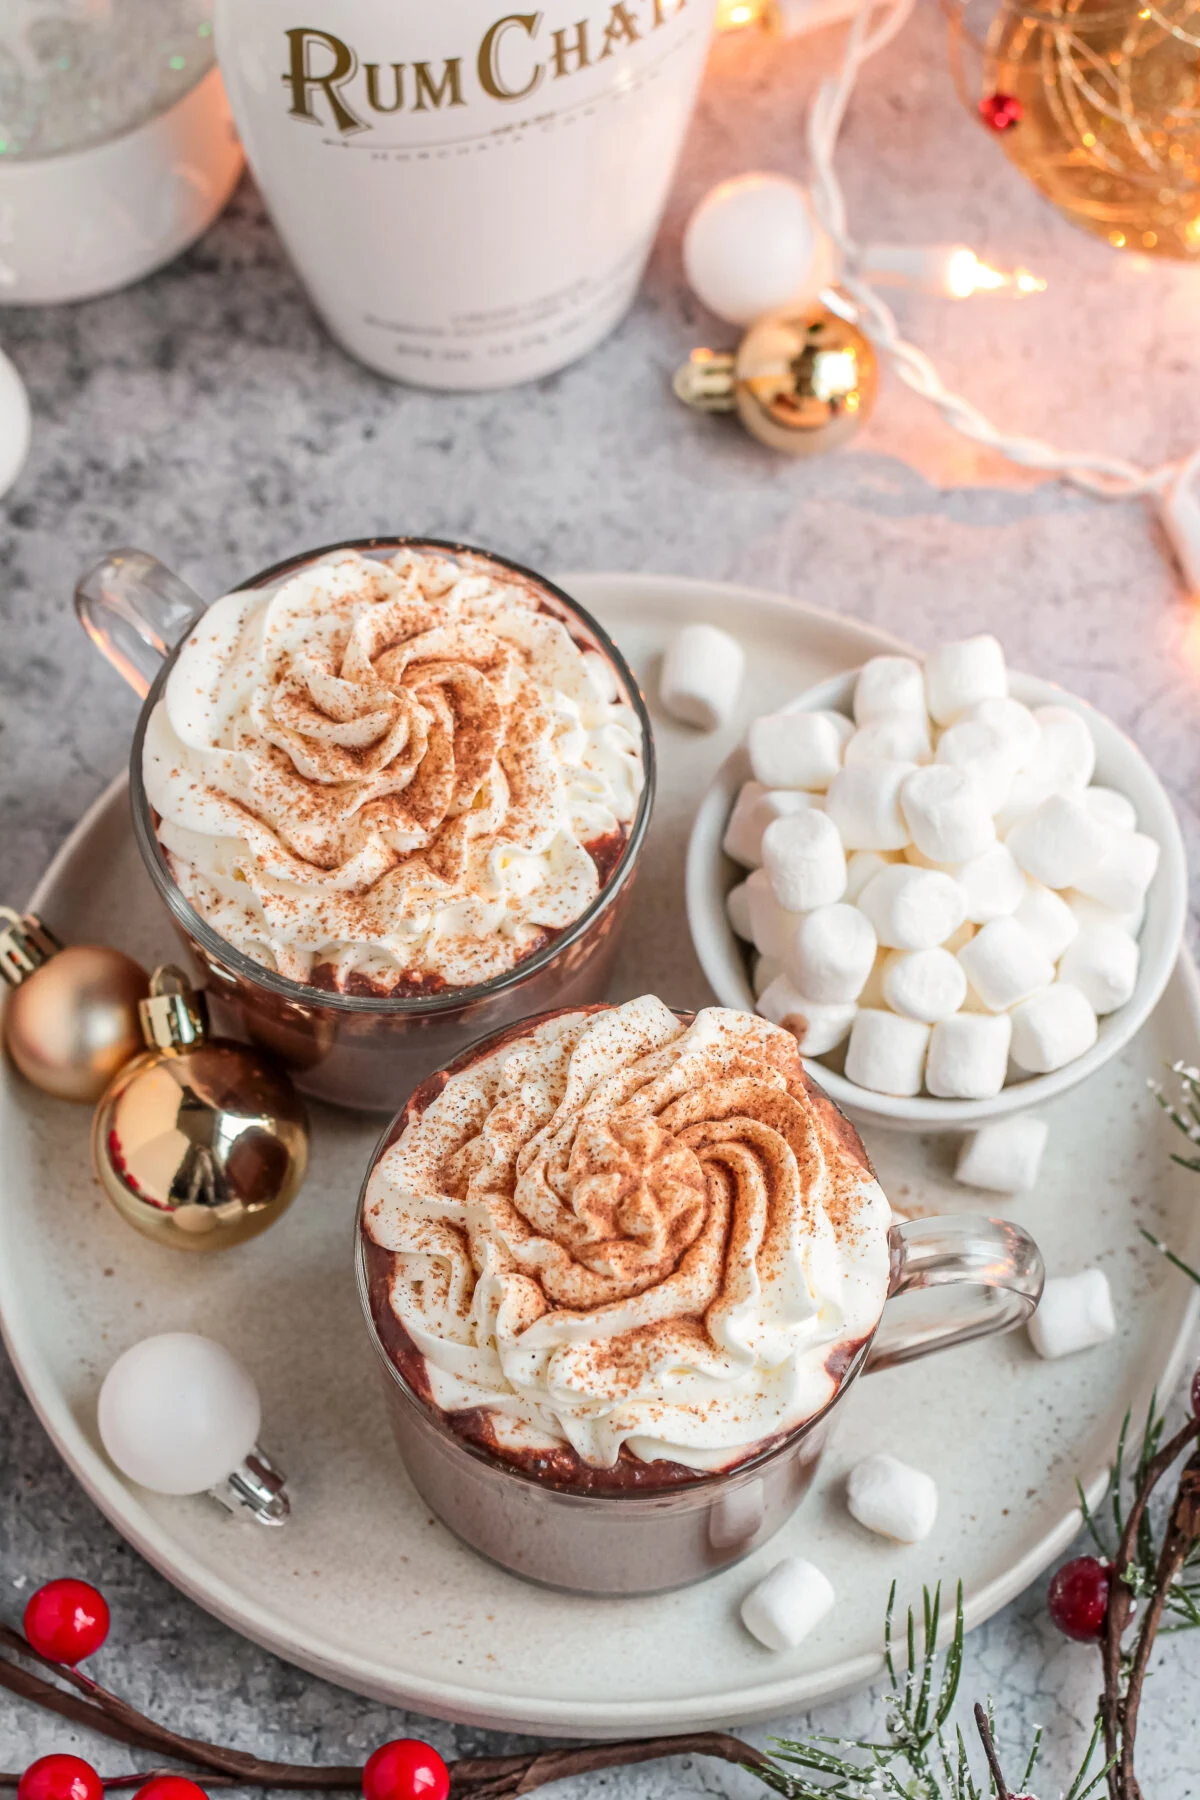 Try my easy recipe for the perfect holiday party drink. This RumChata hot cocoa is a fun twist on traditional hot chocolate!